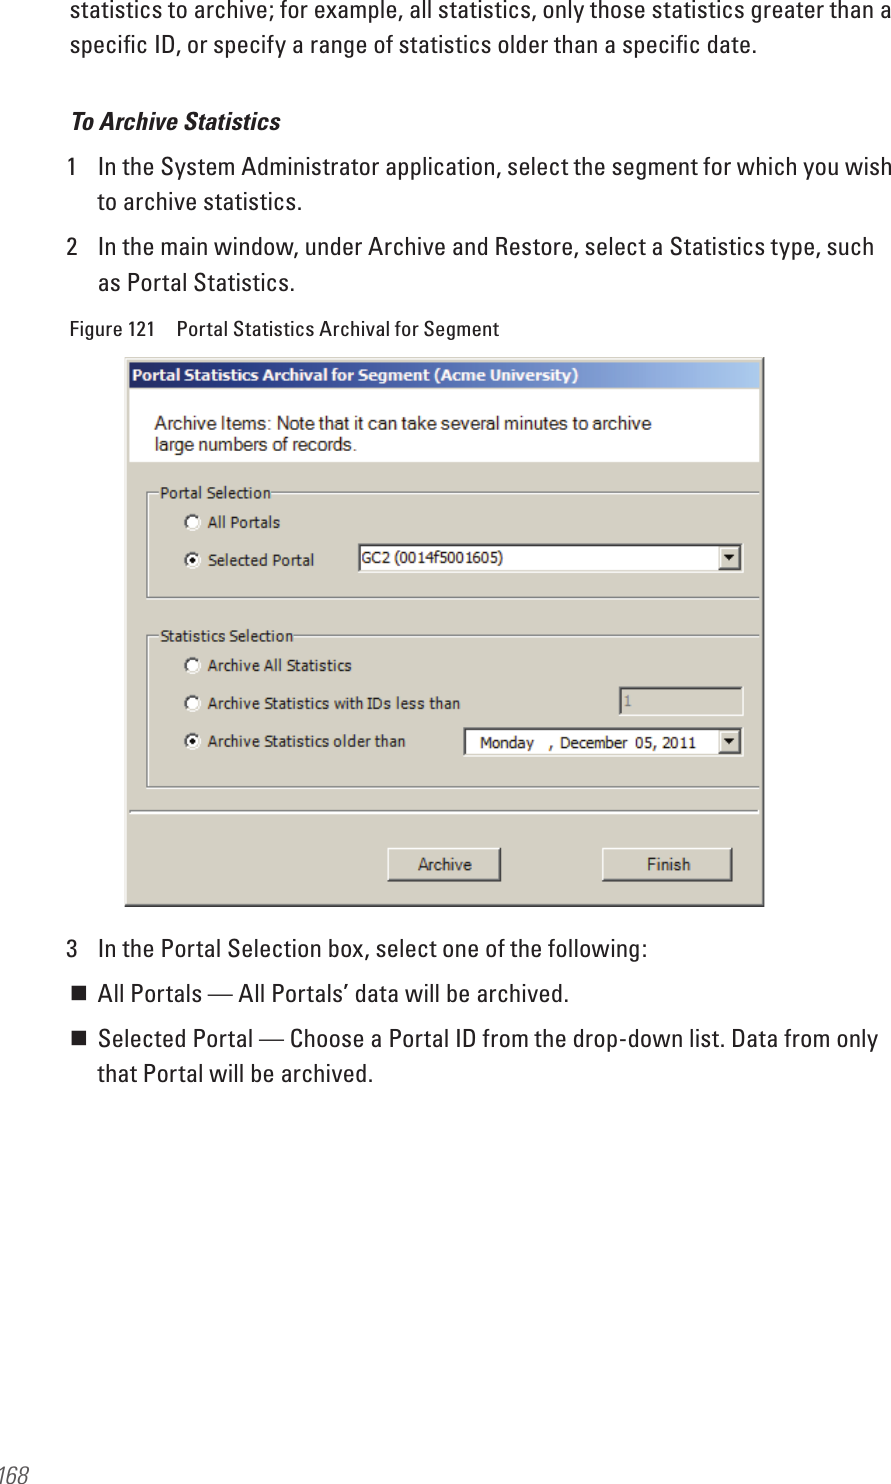 168statistics to archive; for example, all statistics, only those statistics greater than a speciﬁc ID, or specify a range of statistics older than a speciﬁc date. To Archive Statistics1  In the System Administrator application, select the segment for which you wish to archive statistics.2  In the main window, under Archive and Restore, select a Statistics type, such as Portal Statistics.Figure 121  Portal Statistics Archival for Segment3  In the Portal Selection box, select one of the following: All Portals — All Portals’ data will be archived. Selected Portal — Choose a Portal ID from the drop-down list. Data from only that Portal will be archived.